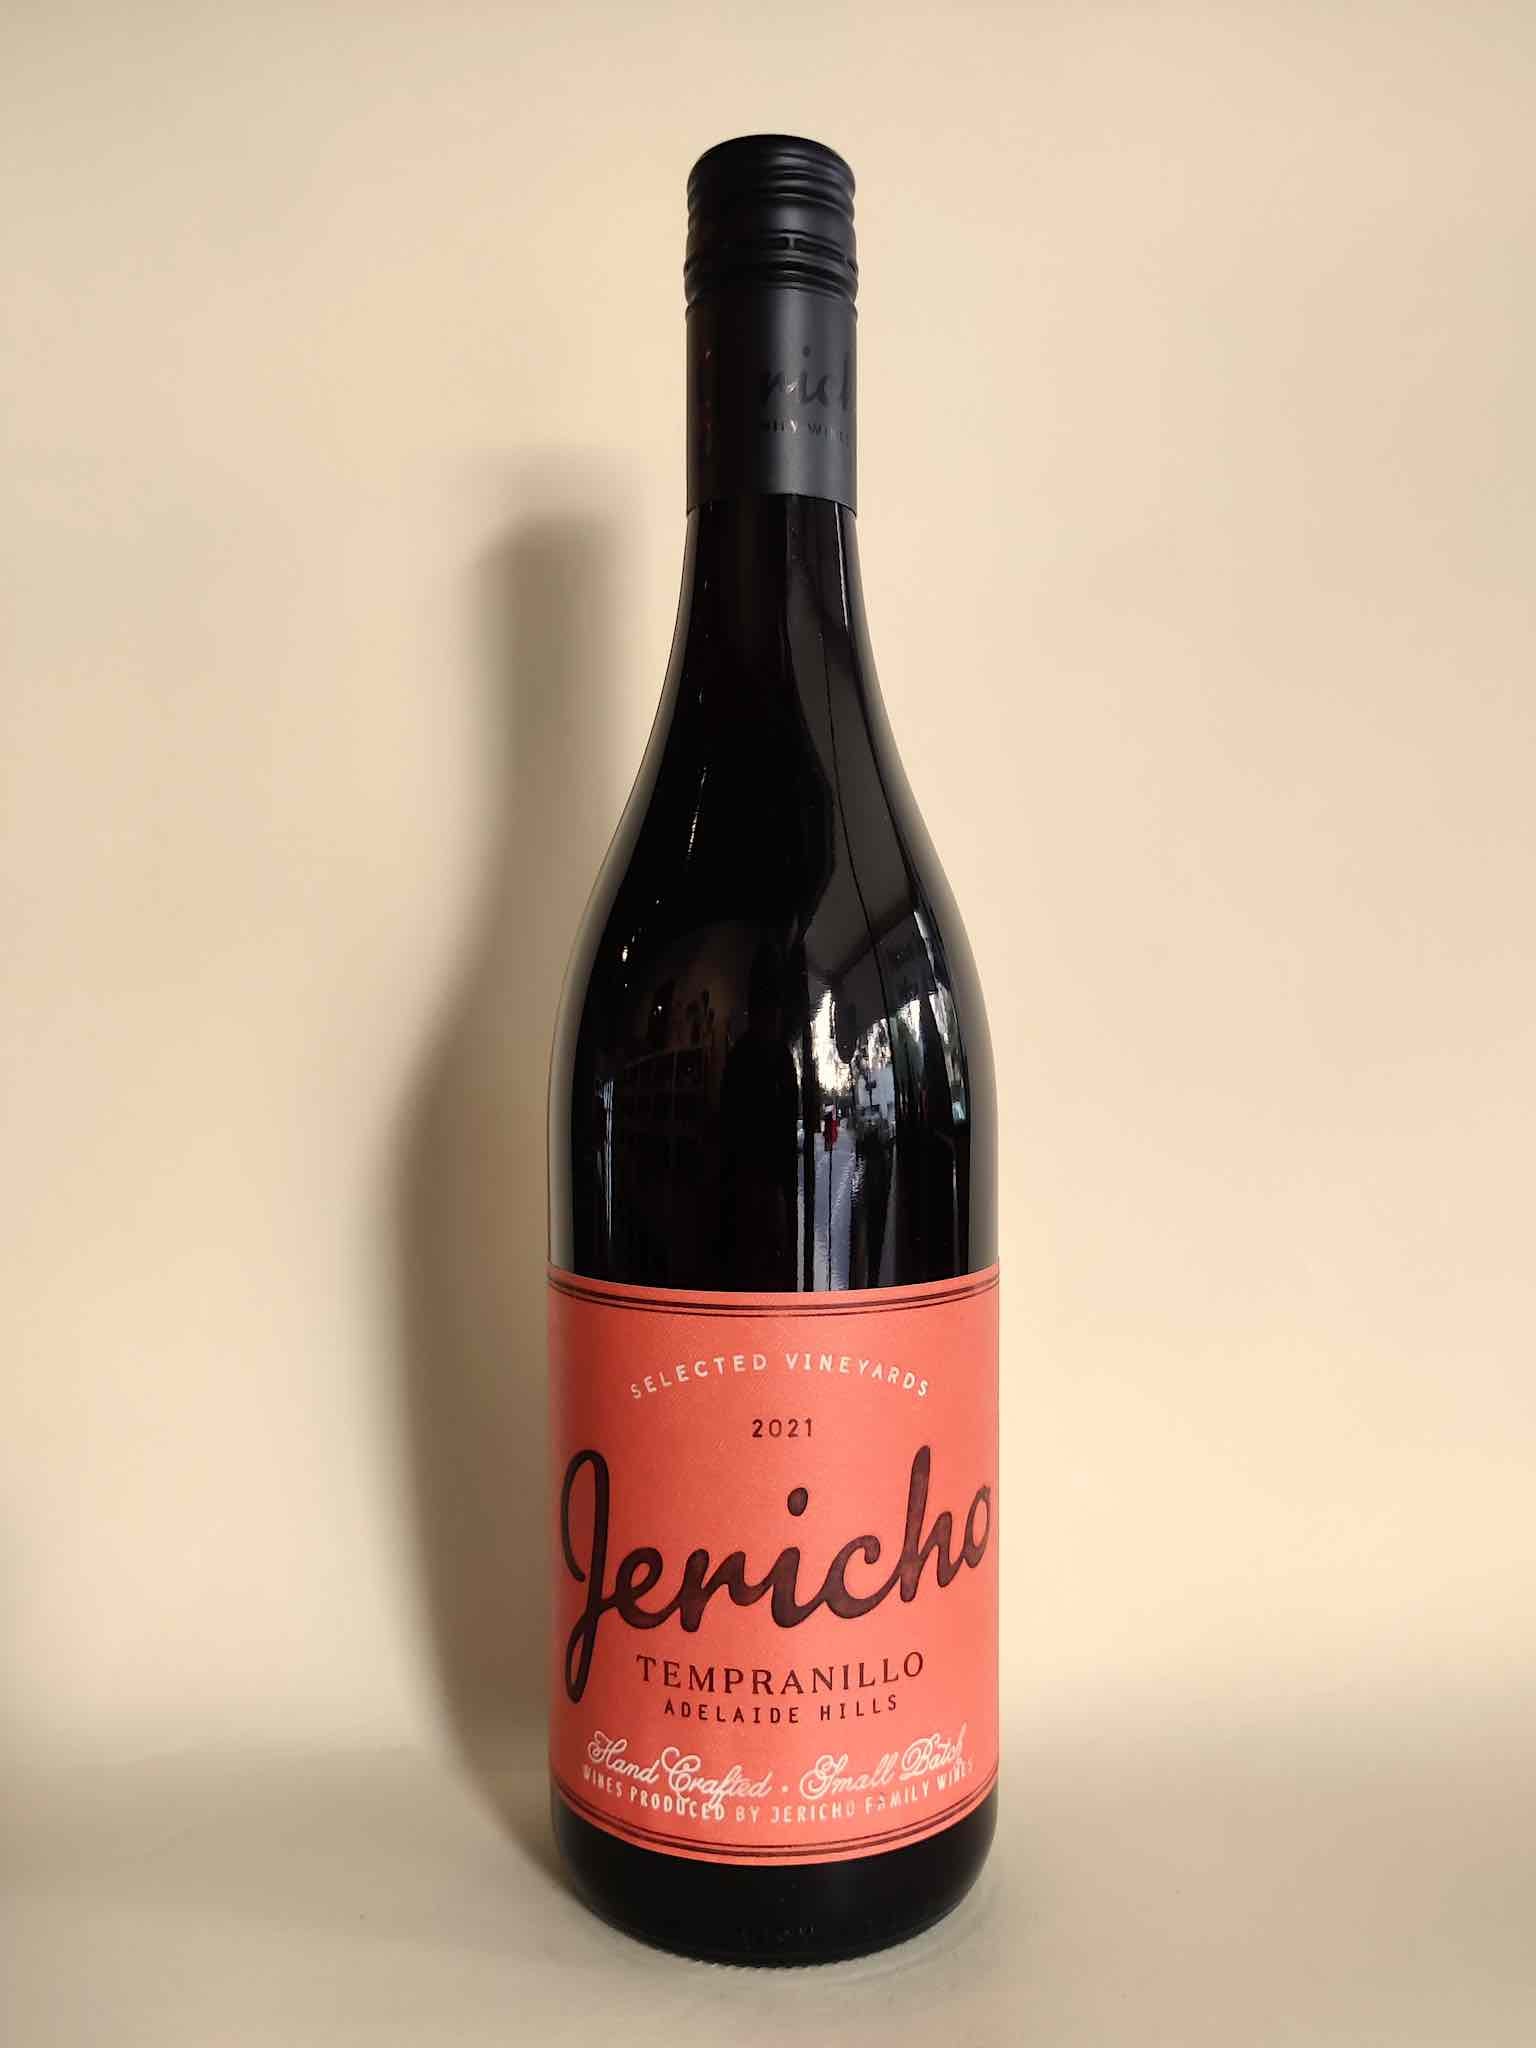 A bottle of Jericho Tempranillo from the Adelaide Hills, South Australia. 